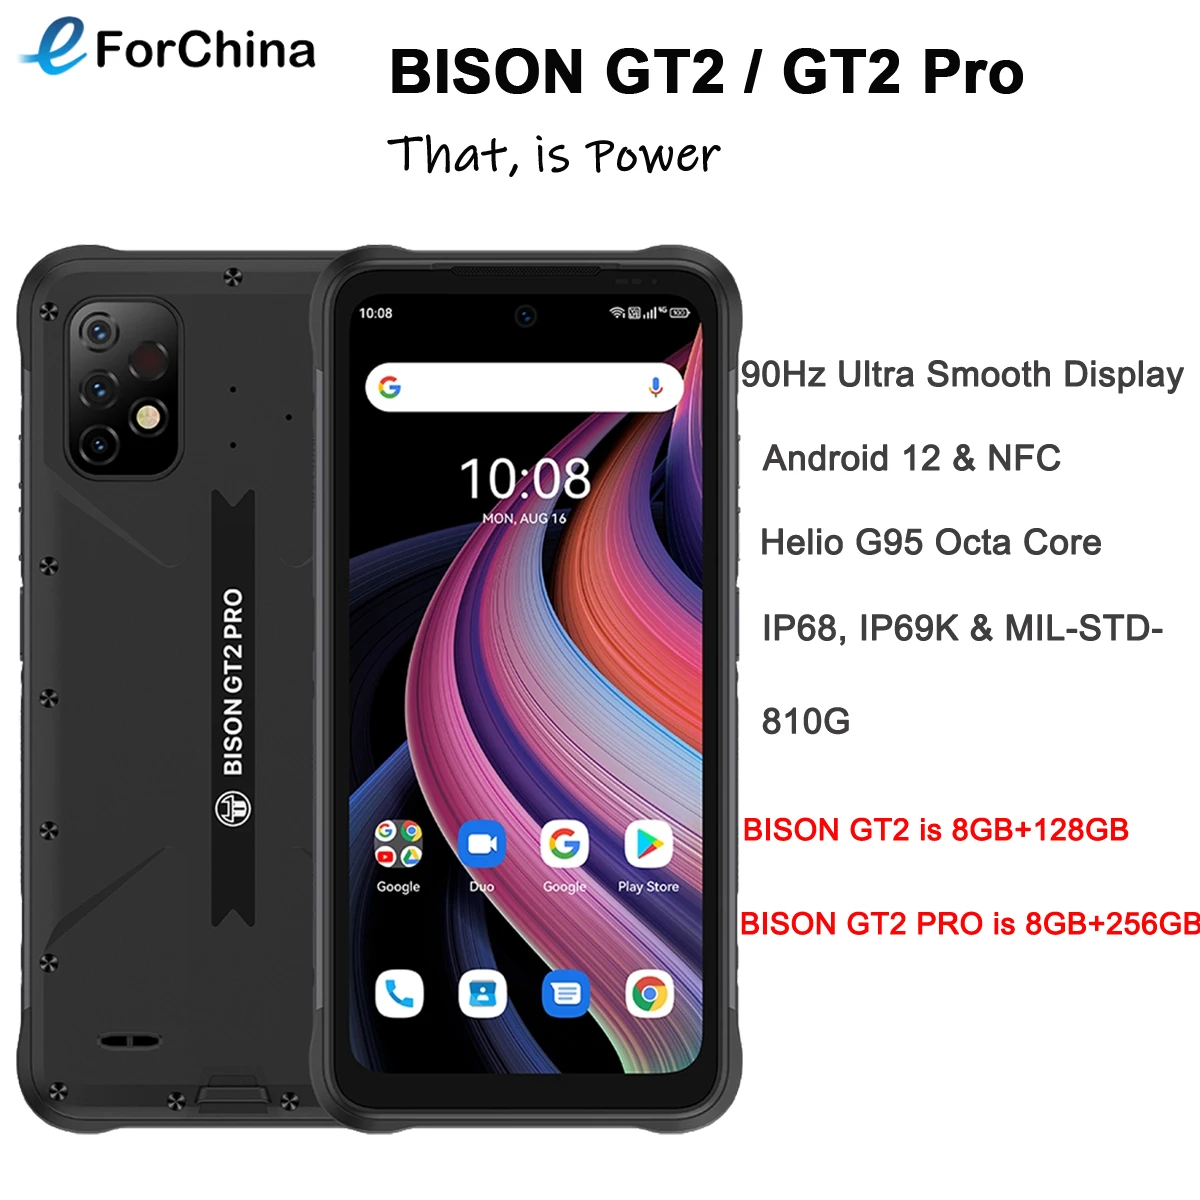 UMIDIGI BISON GT2 PRO 4G Android 12 Rugged Smartphone Helio G95 Octa Core 6.5" FHD+ NFC 64MP Camera 6150 mAh Battery Phone